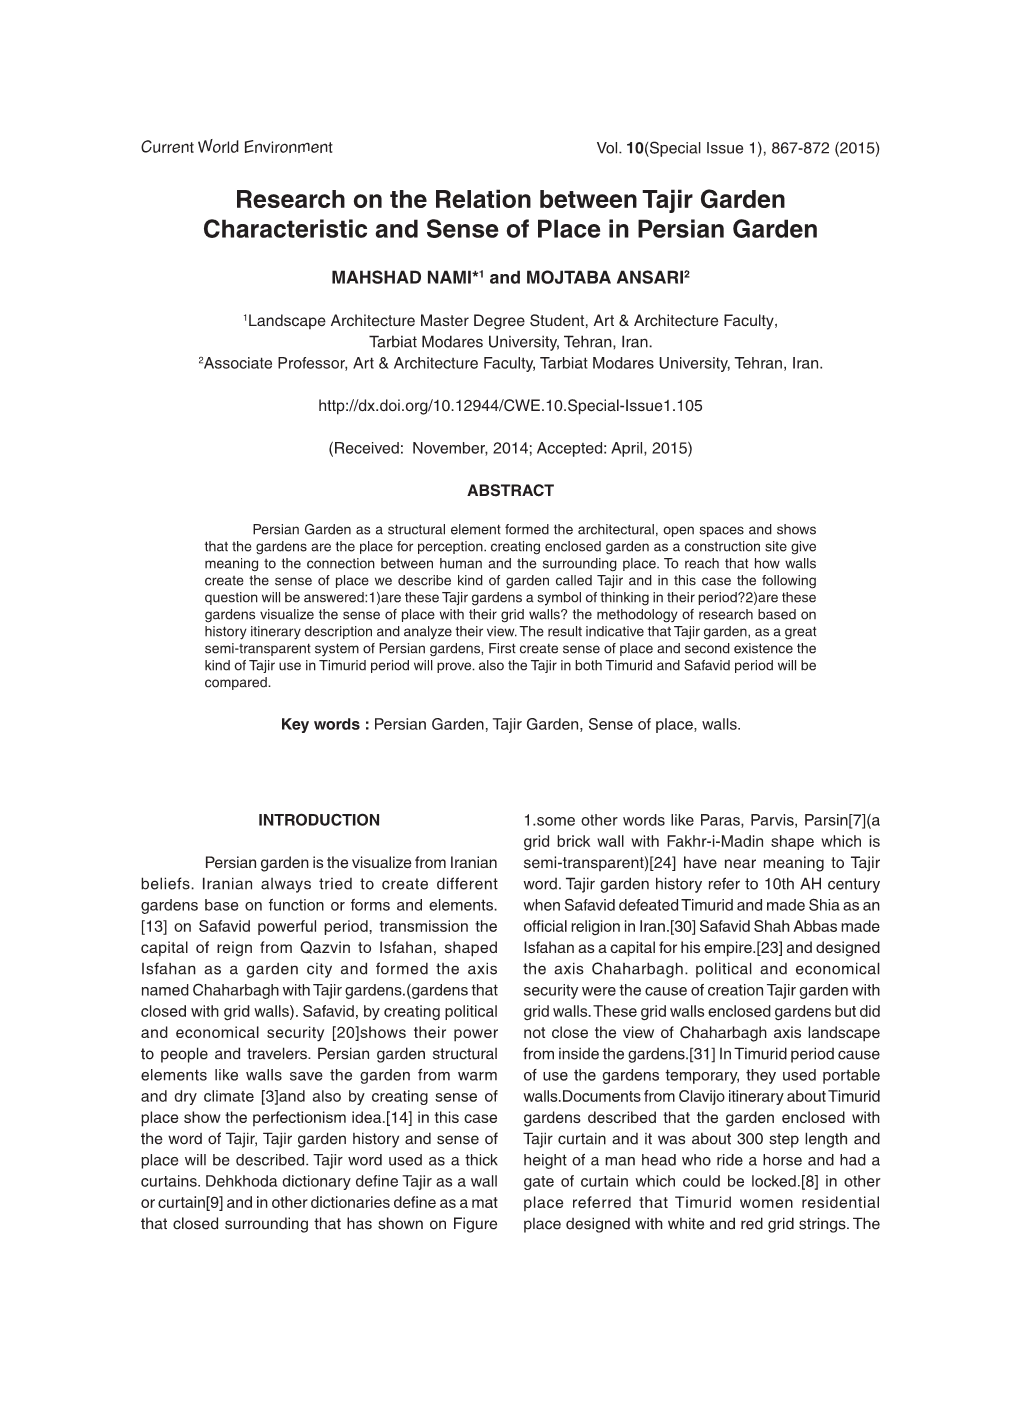 Research on the Relation Between Tajir Garden Characteristic and Sense of Place in Persian Garden